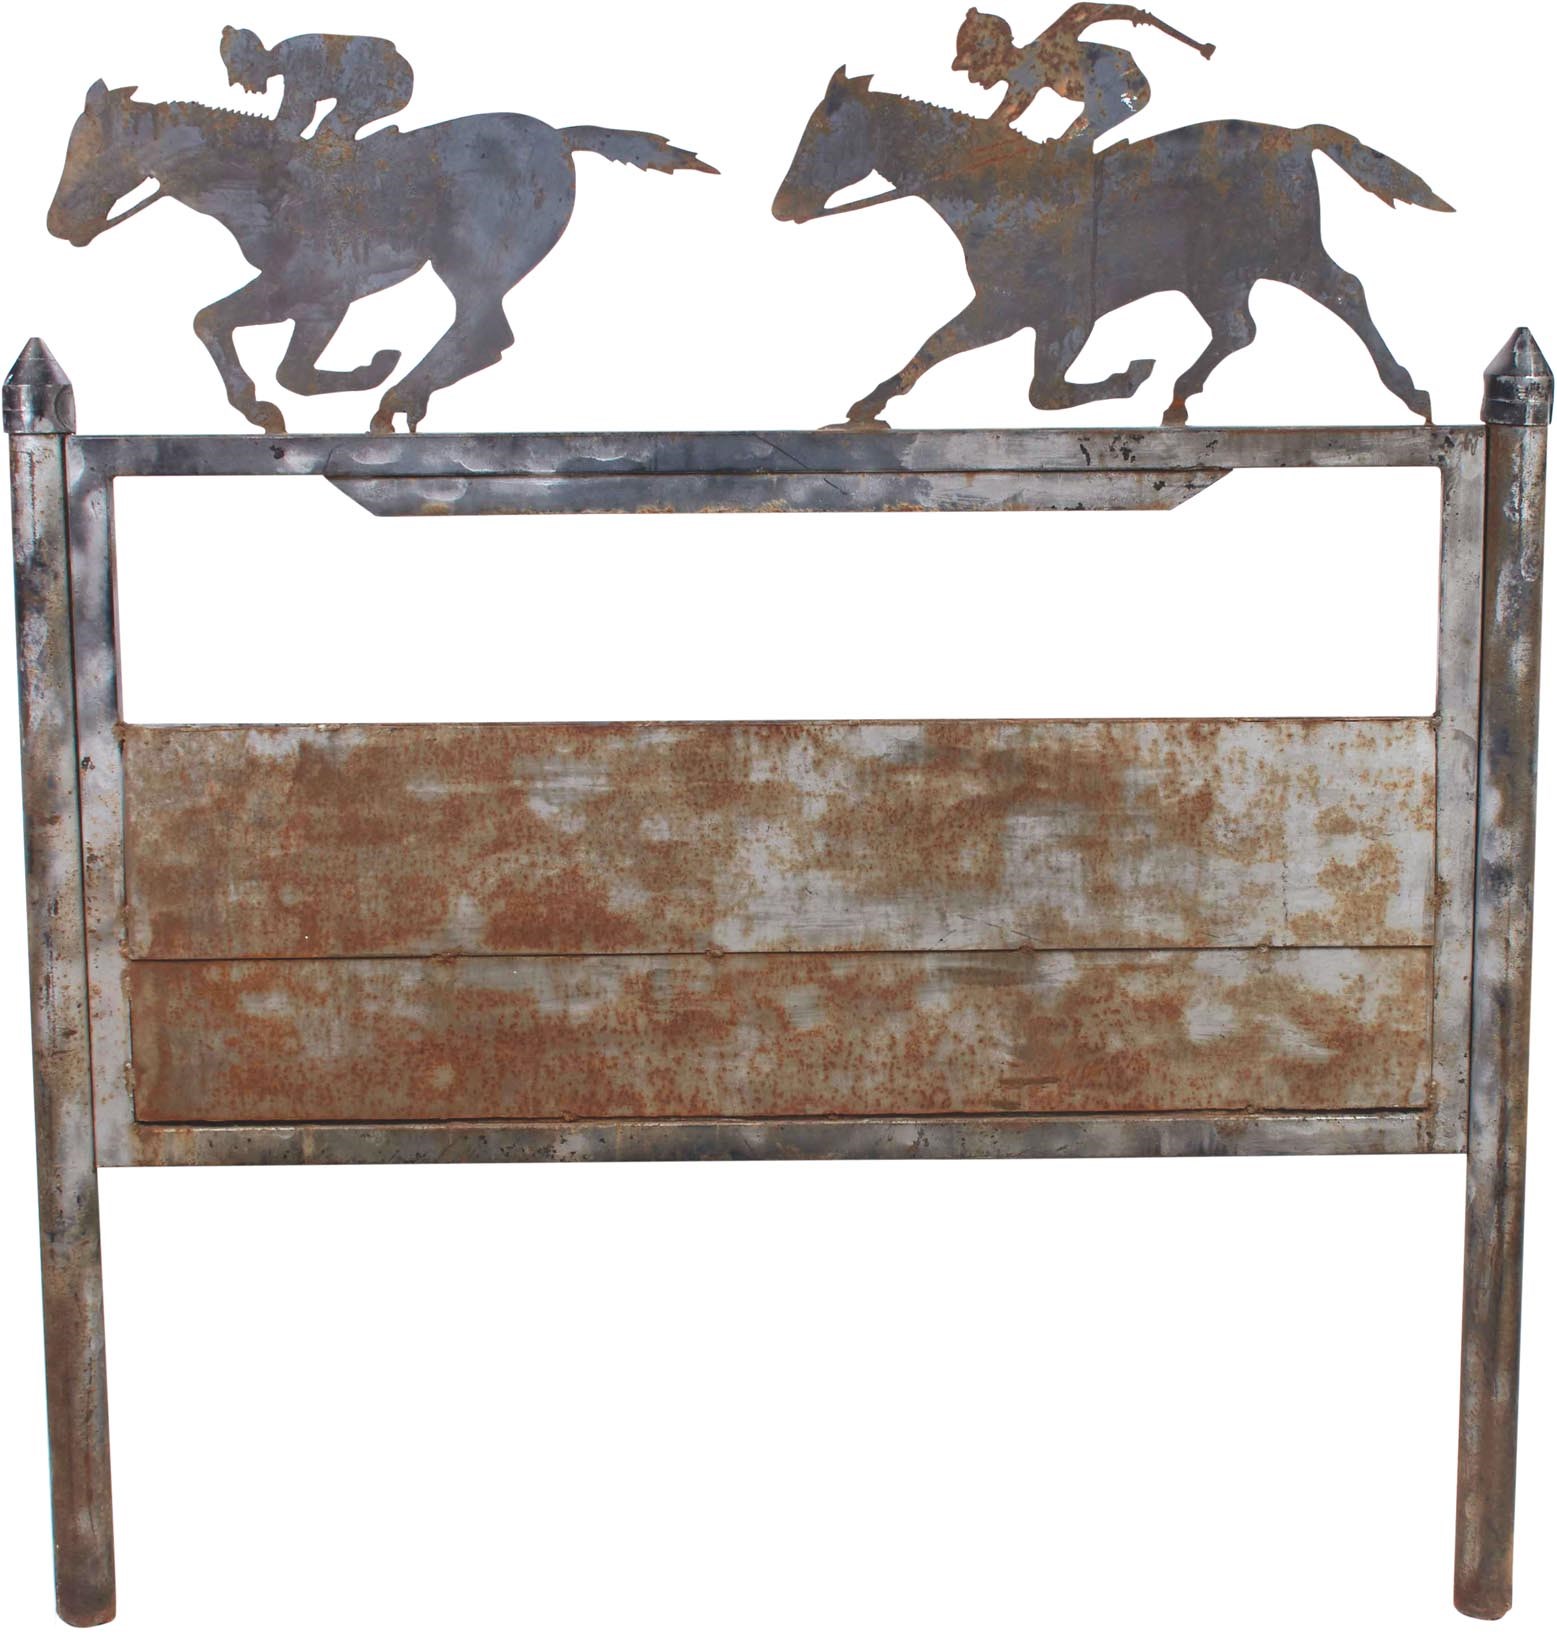 Exceptional 1930s Horse Racing Stable Cast Iron Trade Sign